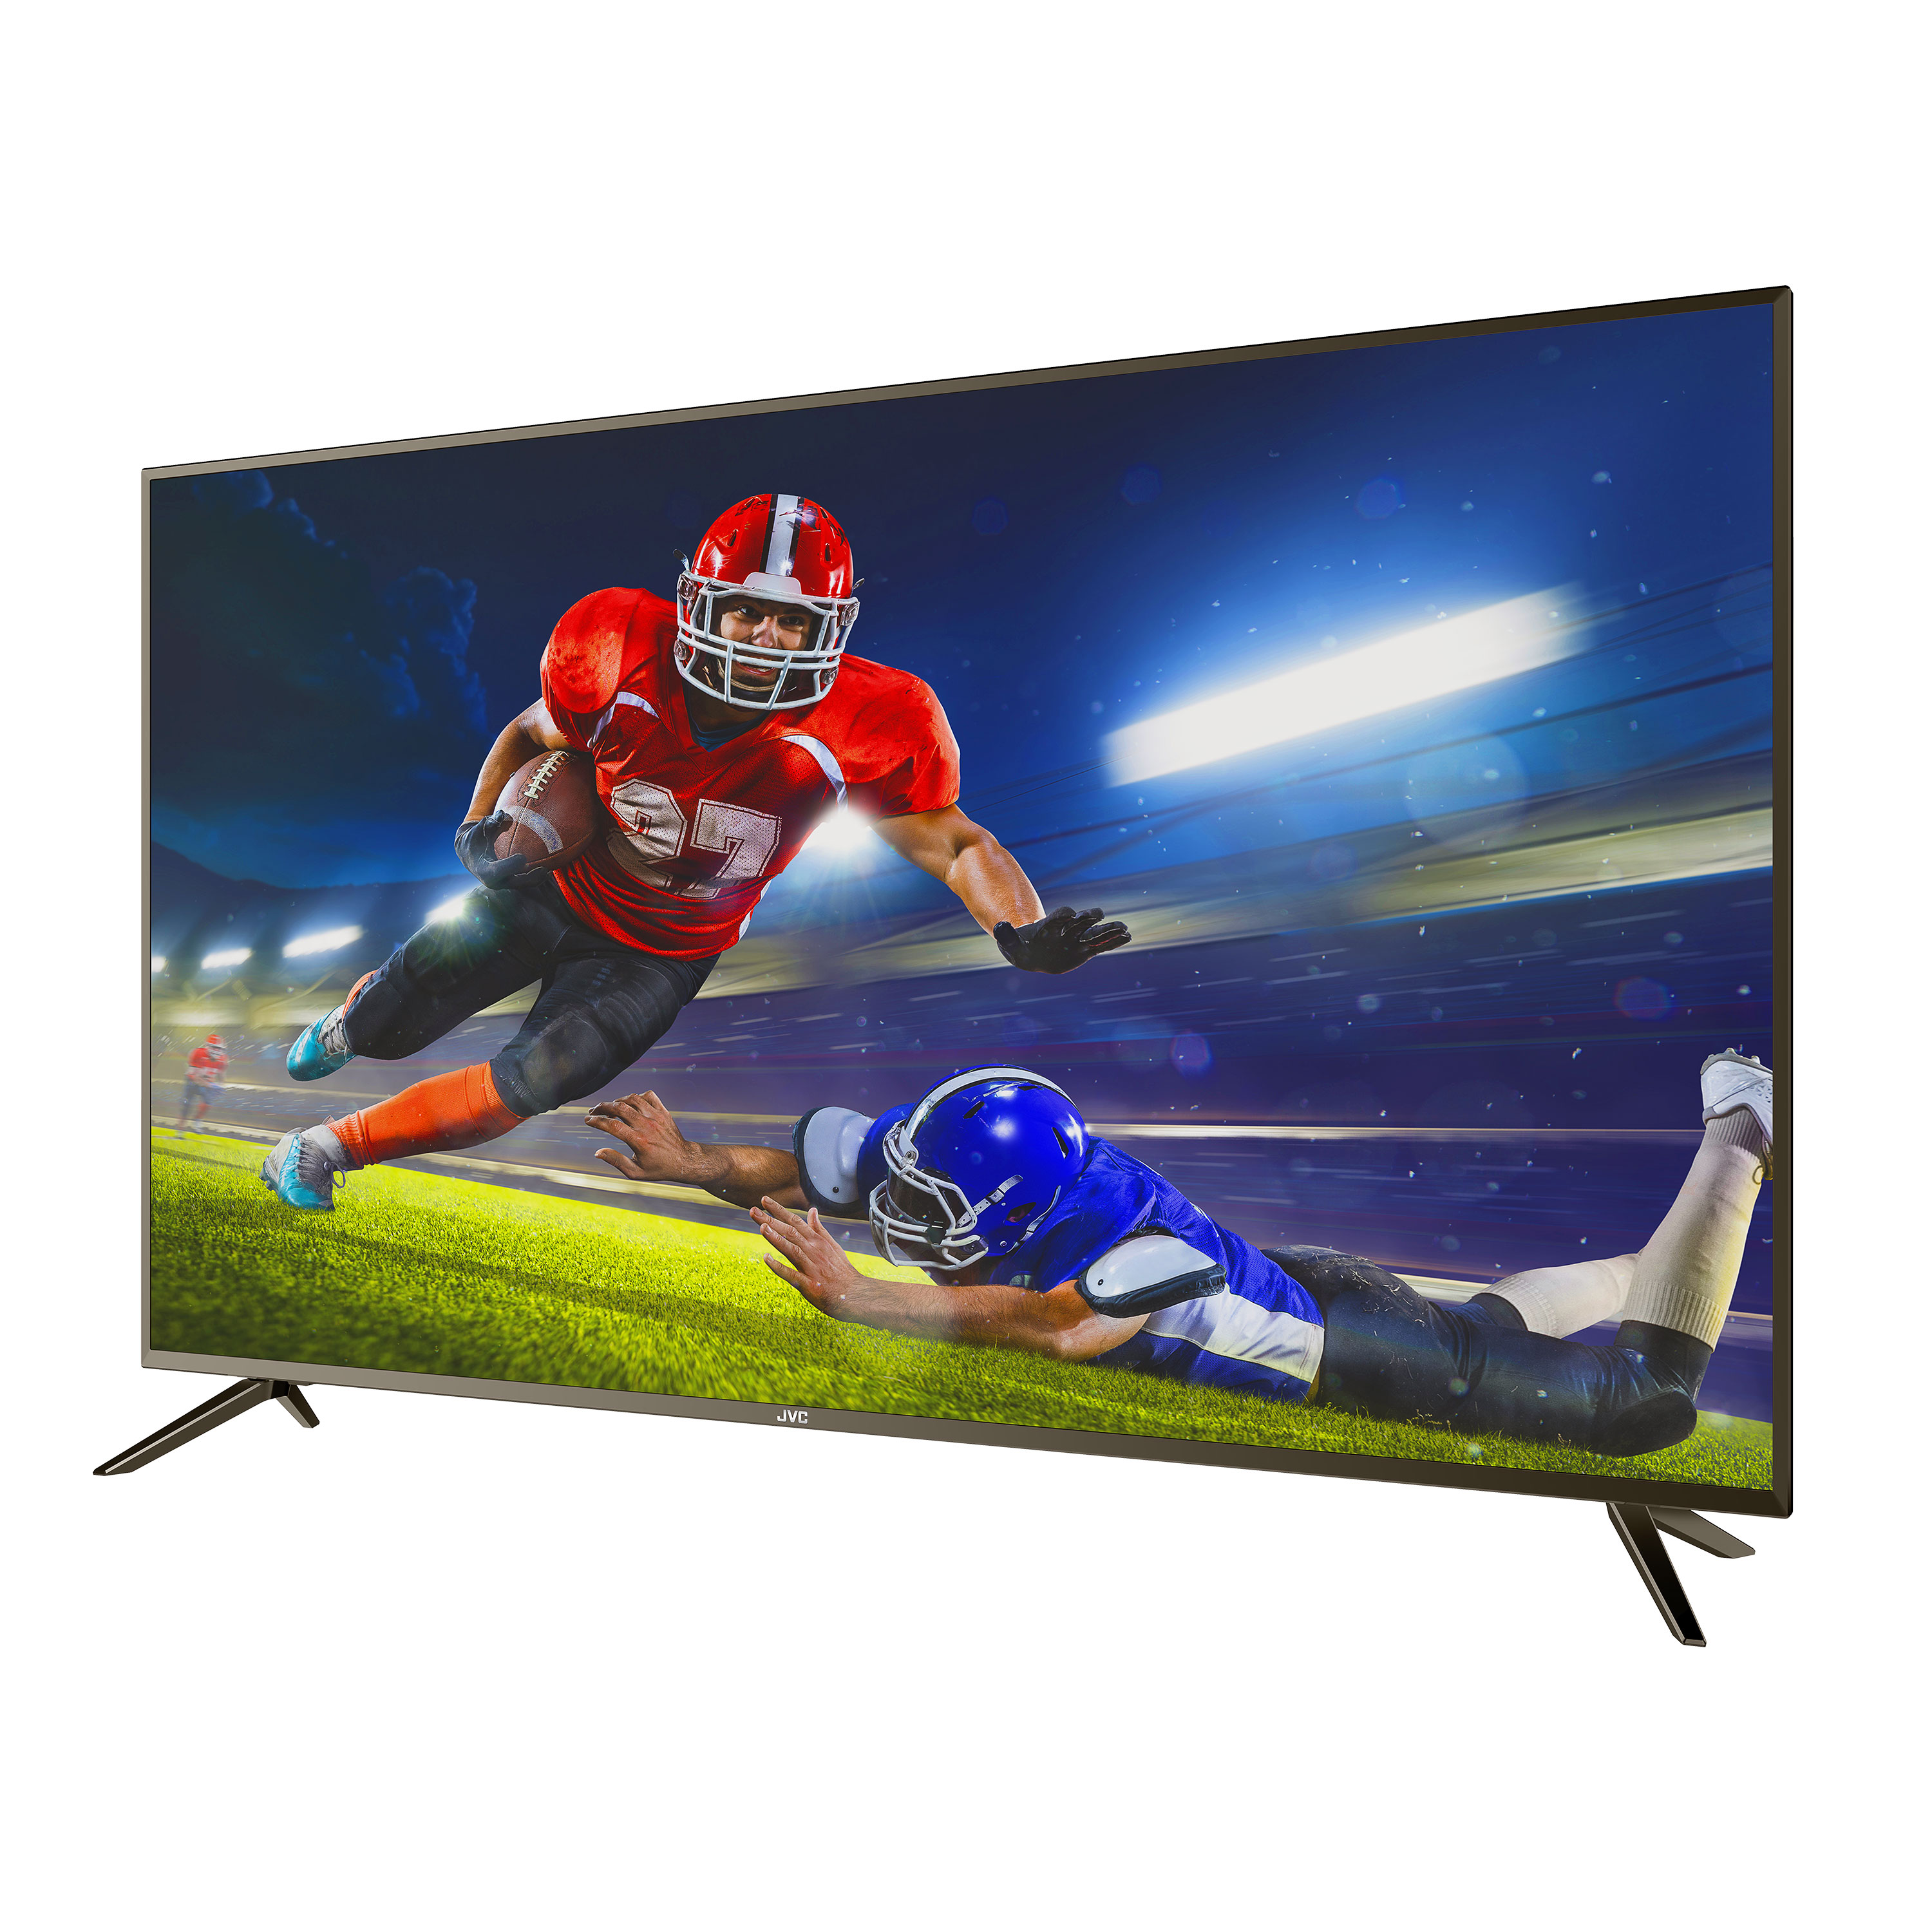 JVC 55" Class 4K Ultra HD (2160P) HDR Smart LED TV with Built-in Chromecast (LT-55MA875) - image 2 of 8